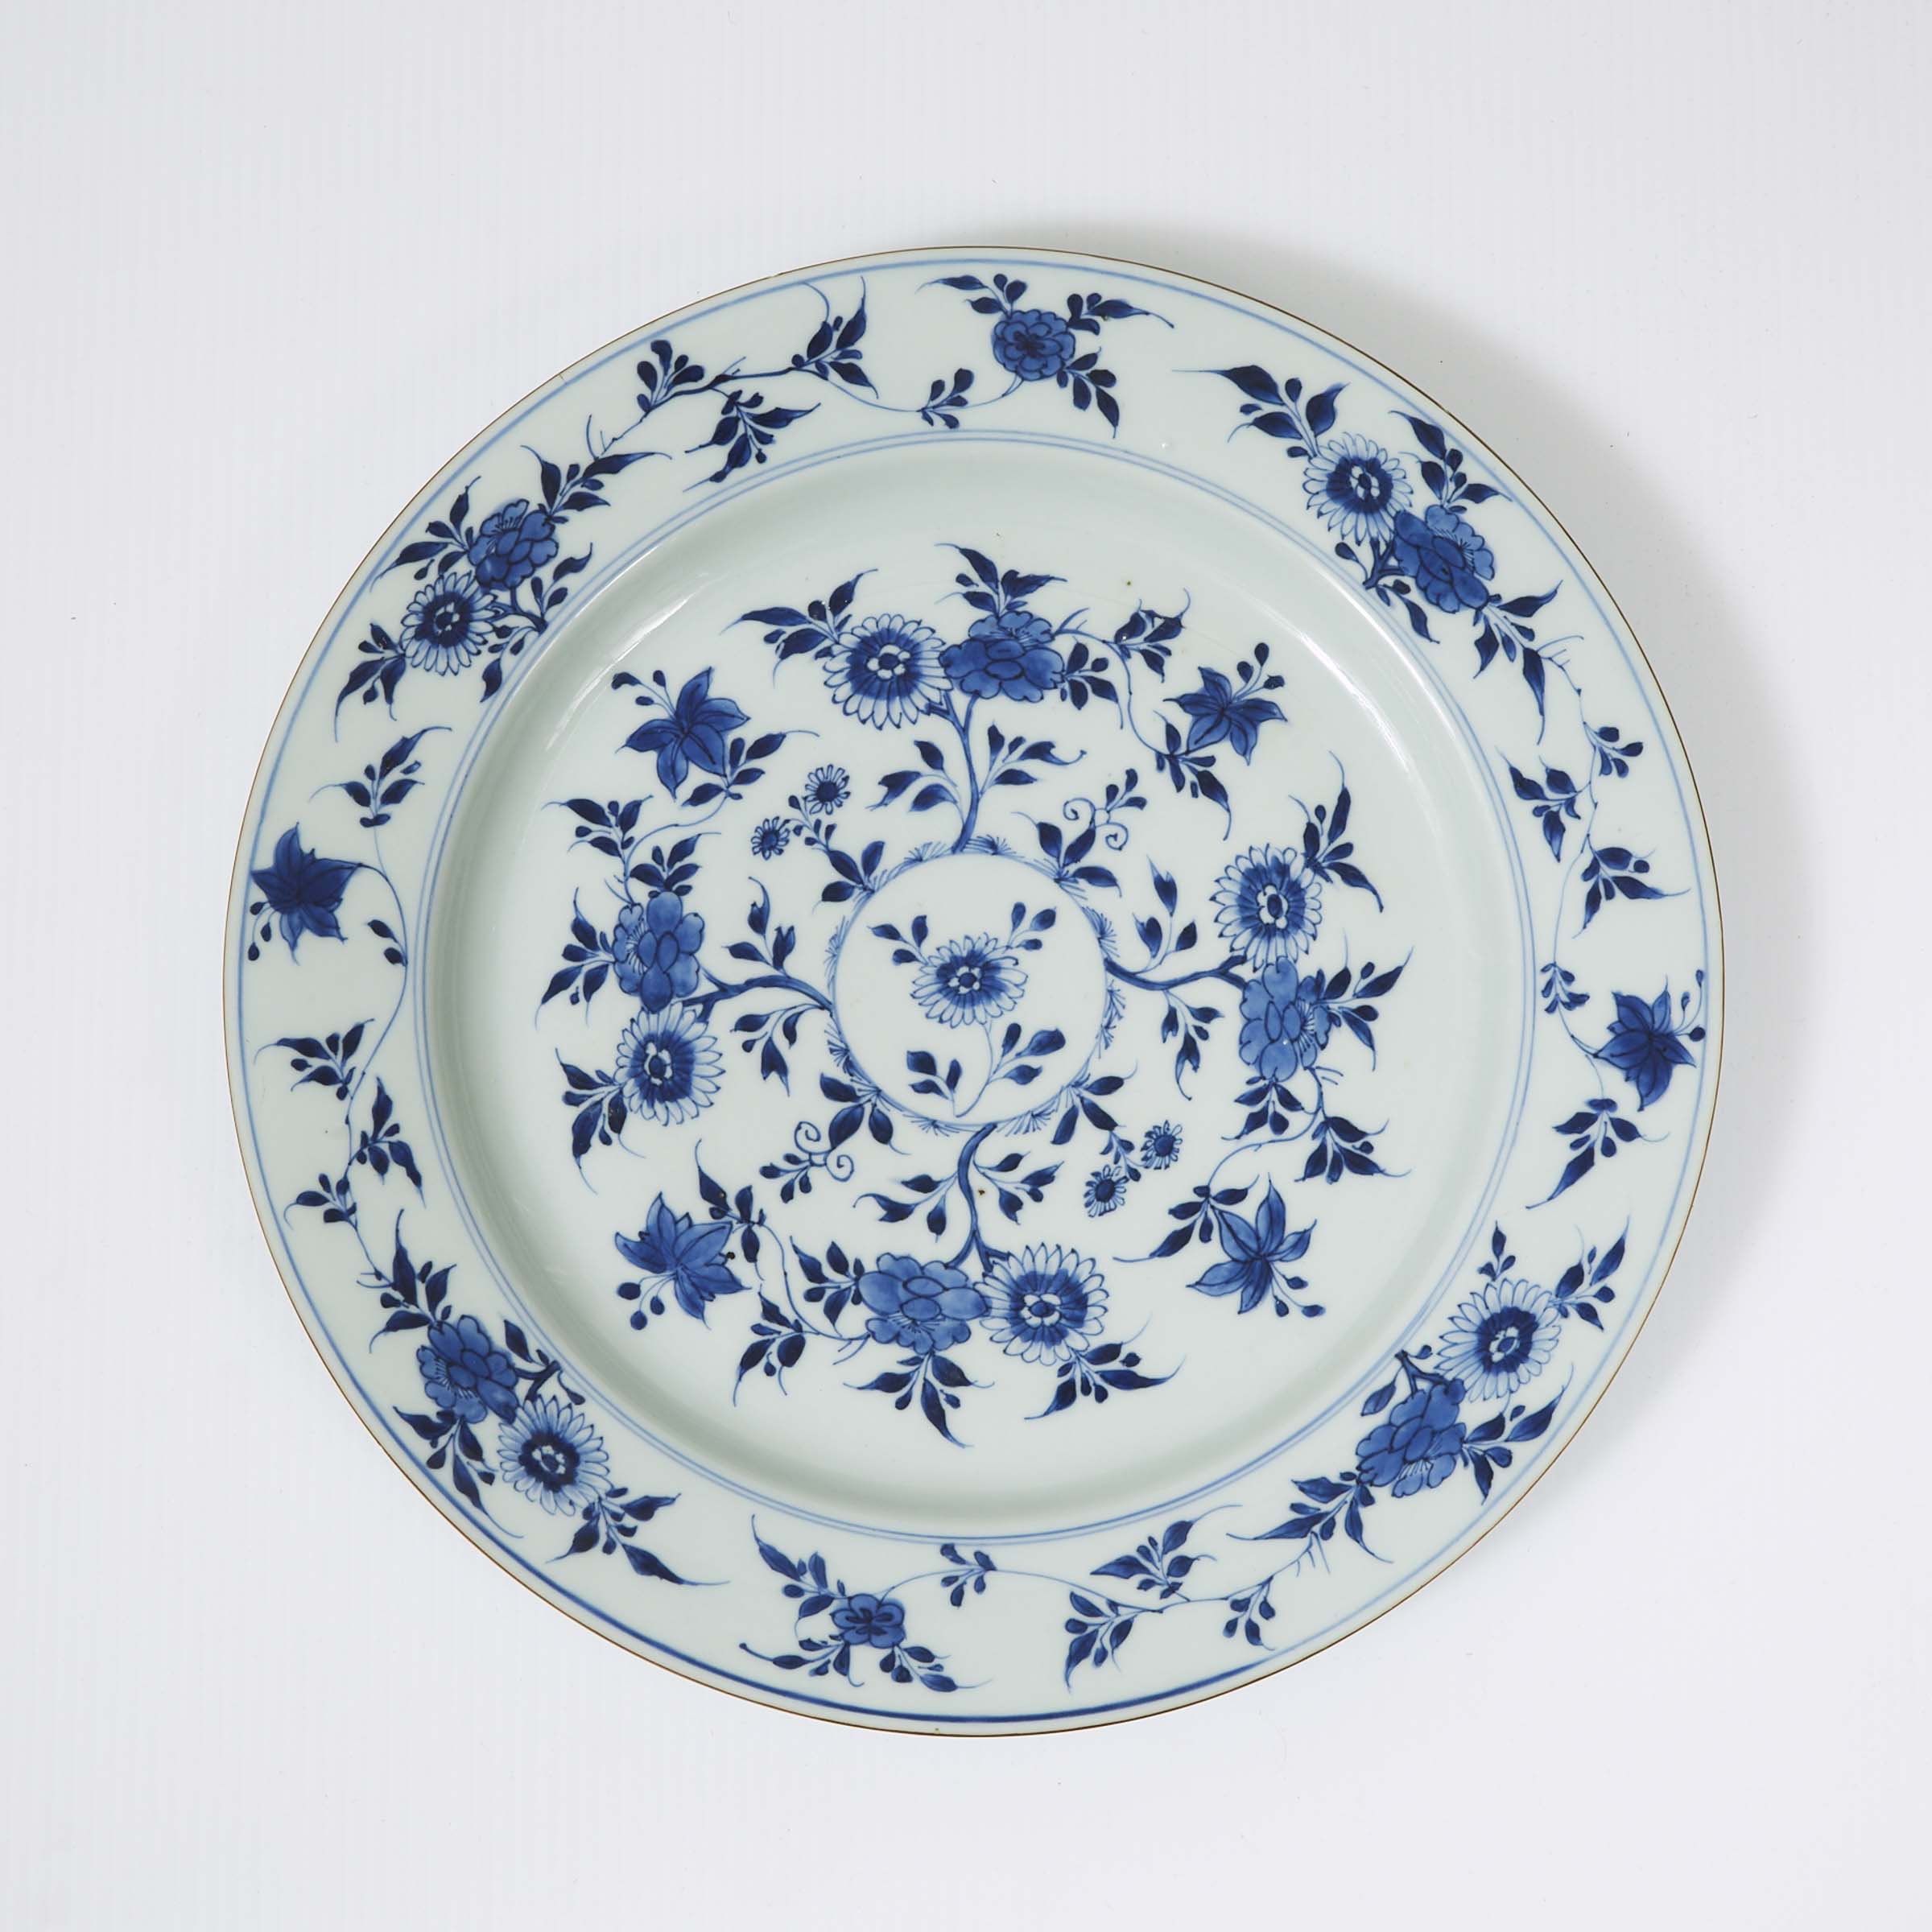 A Large Blue and White 'Floral' Charger, 18th Century